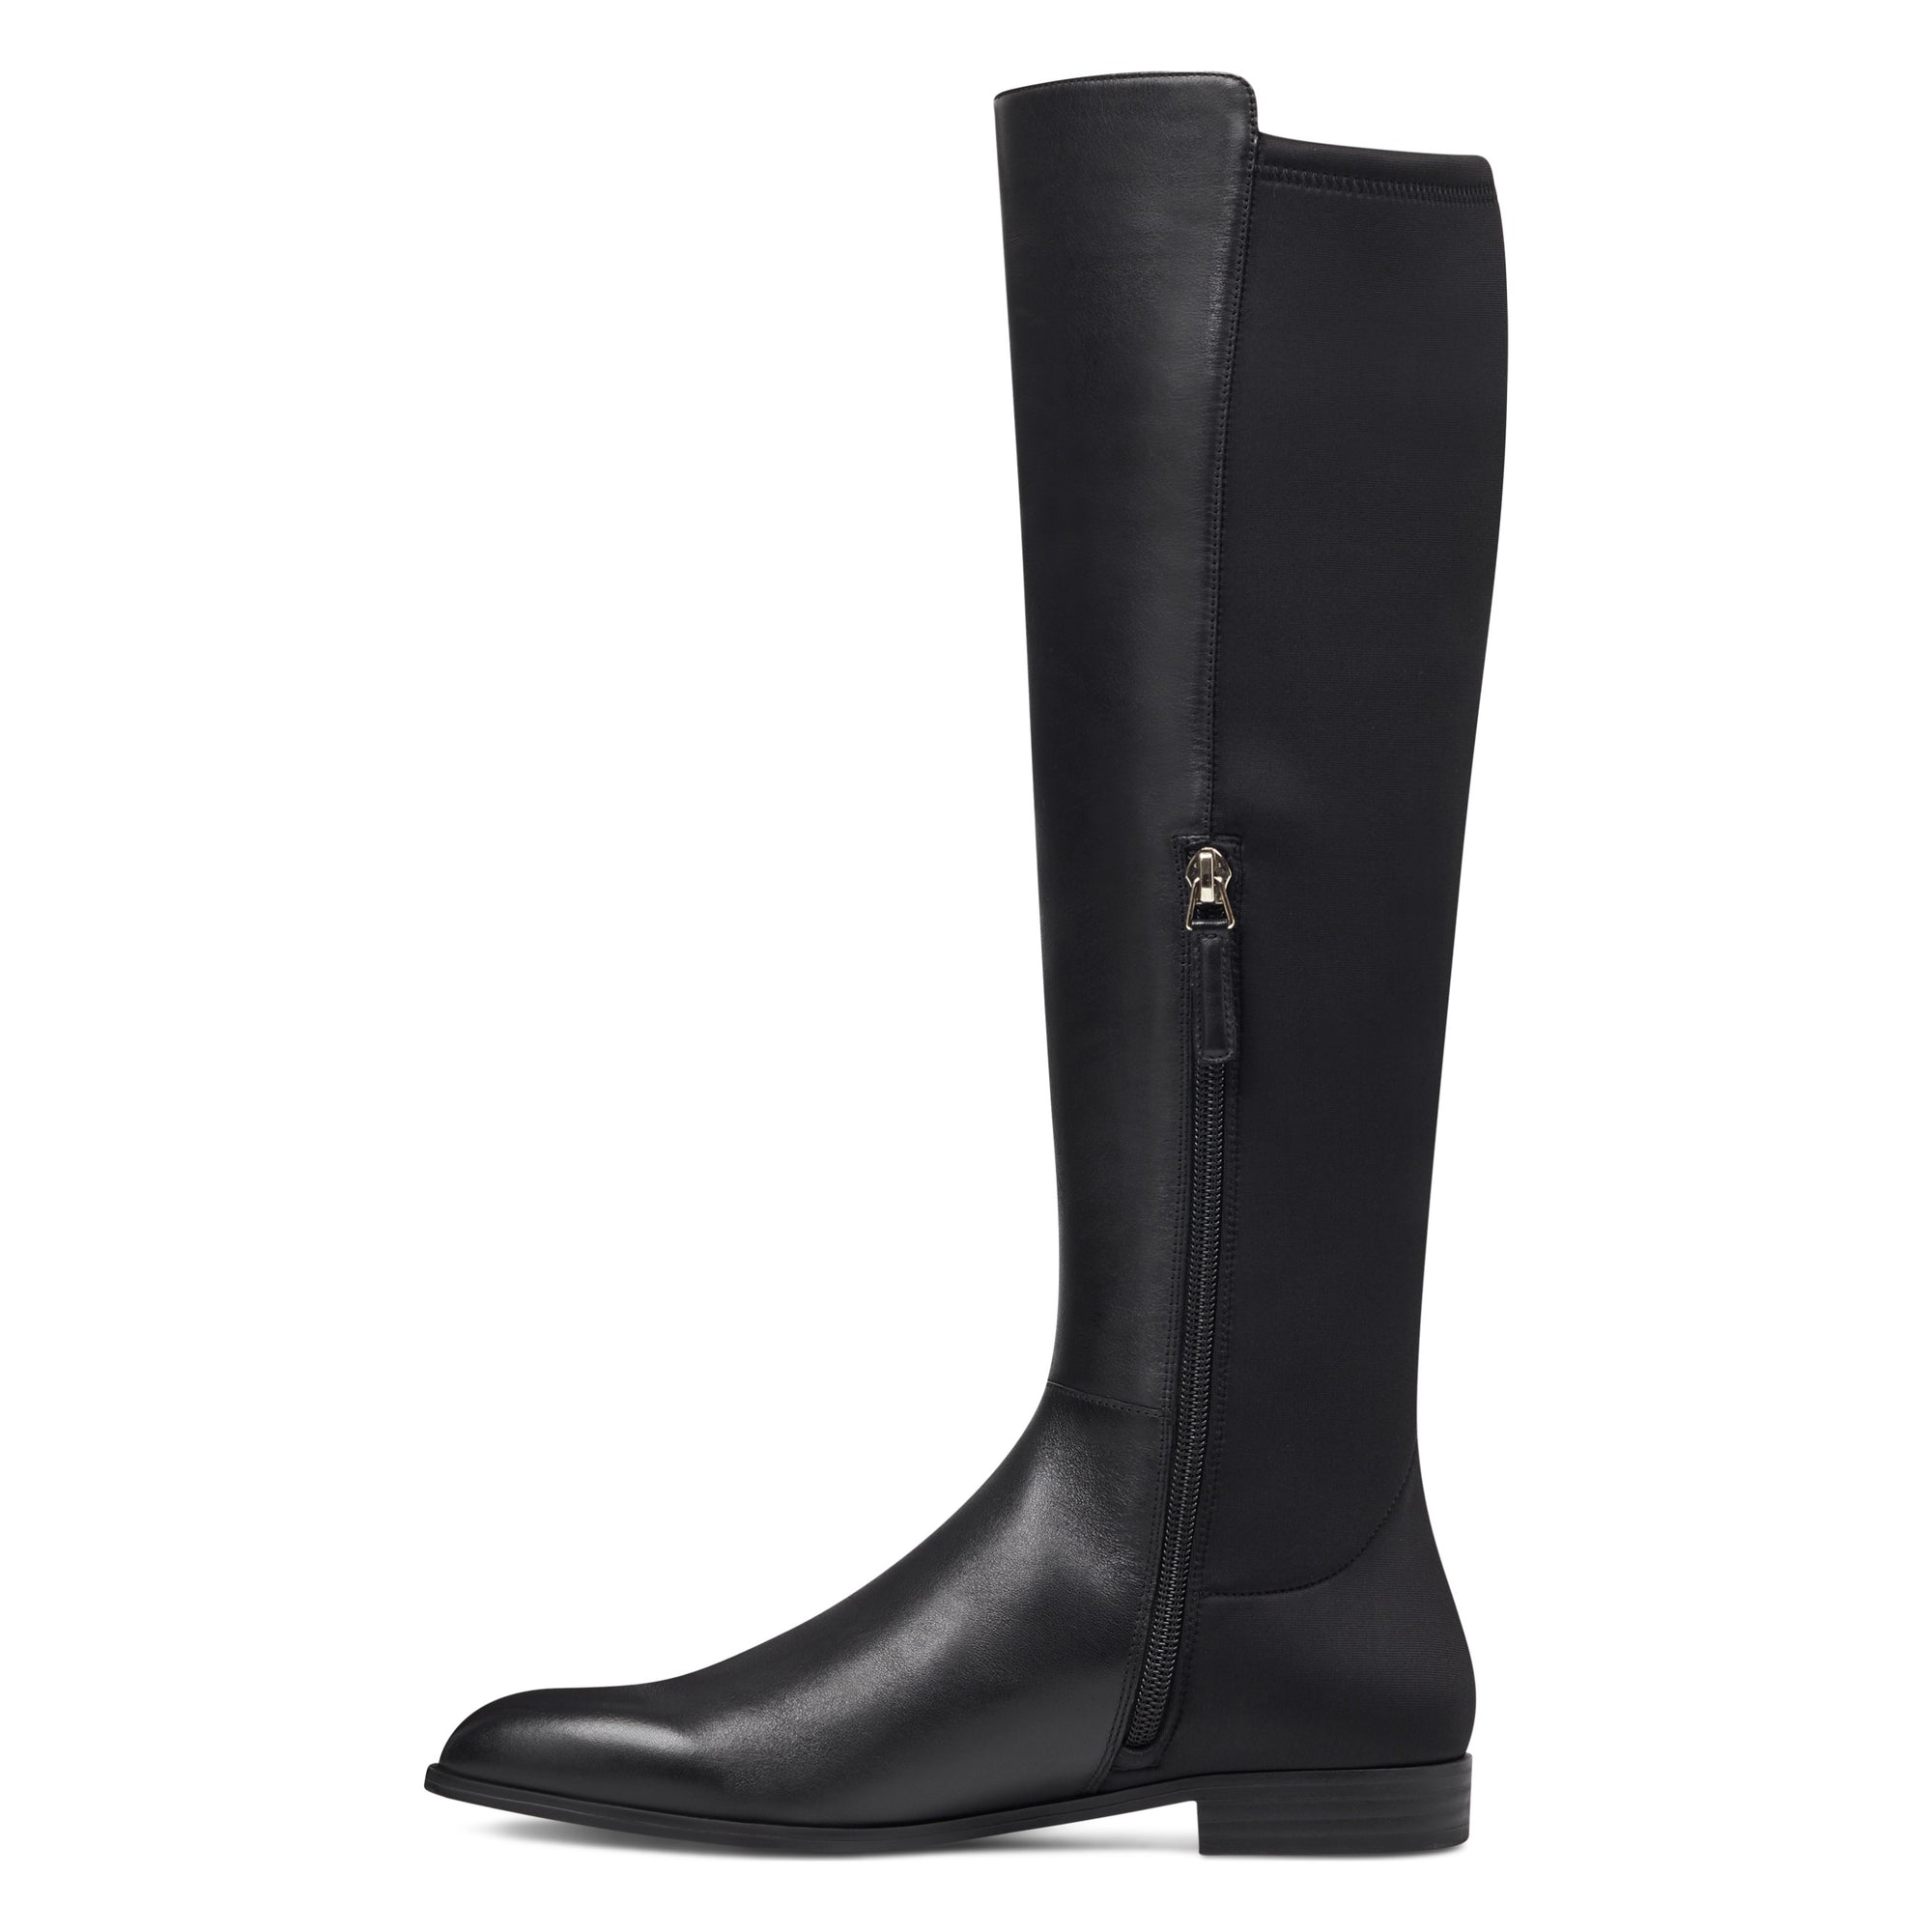 owenford knee high riding boot